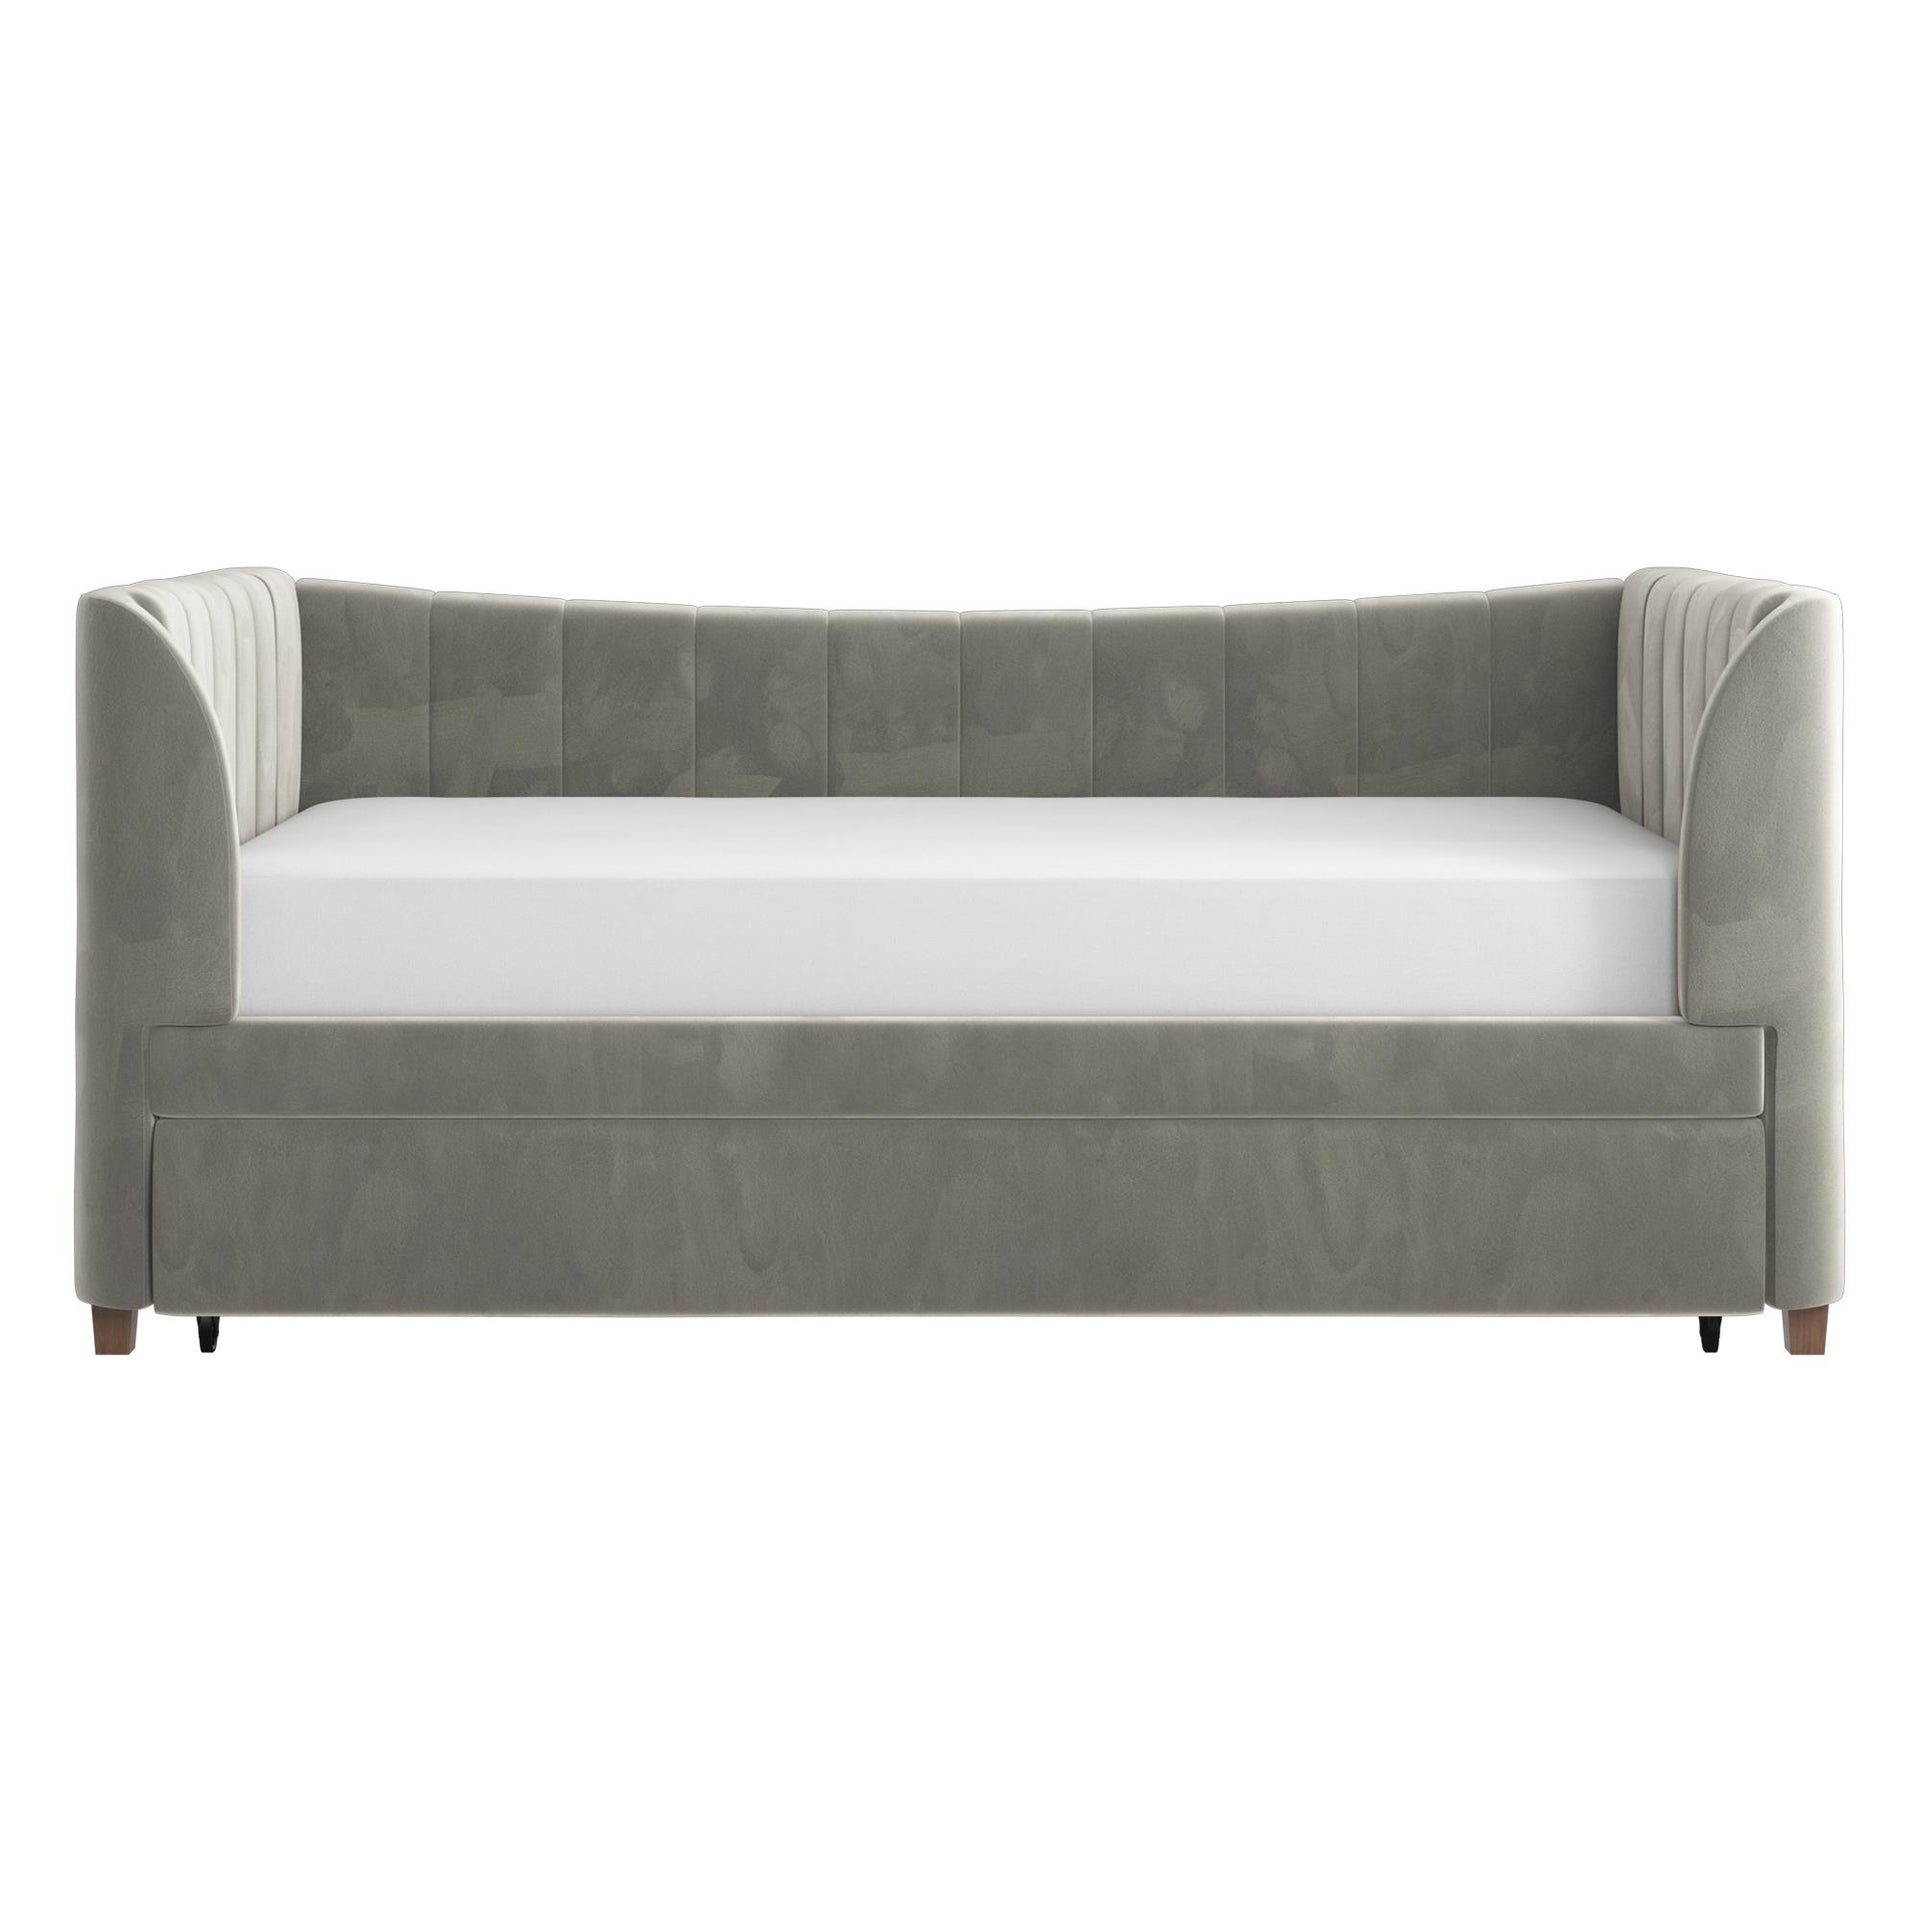 Little Seeds Valentina Upholstered Daybed with Trundle - Gray - Twin